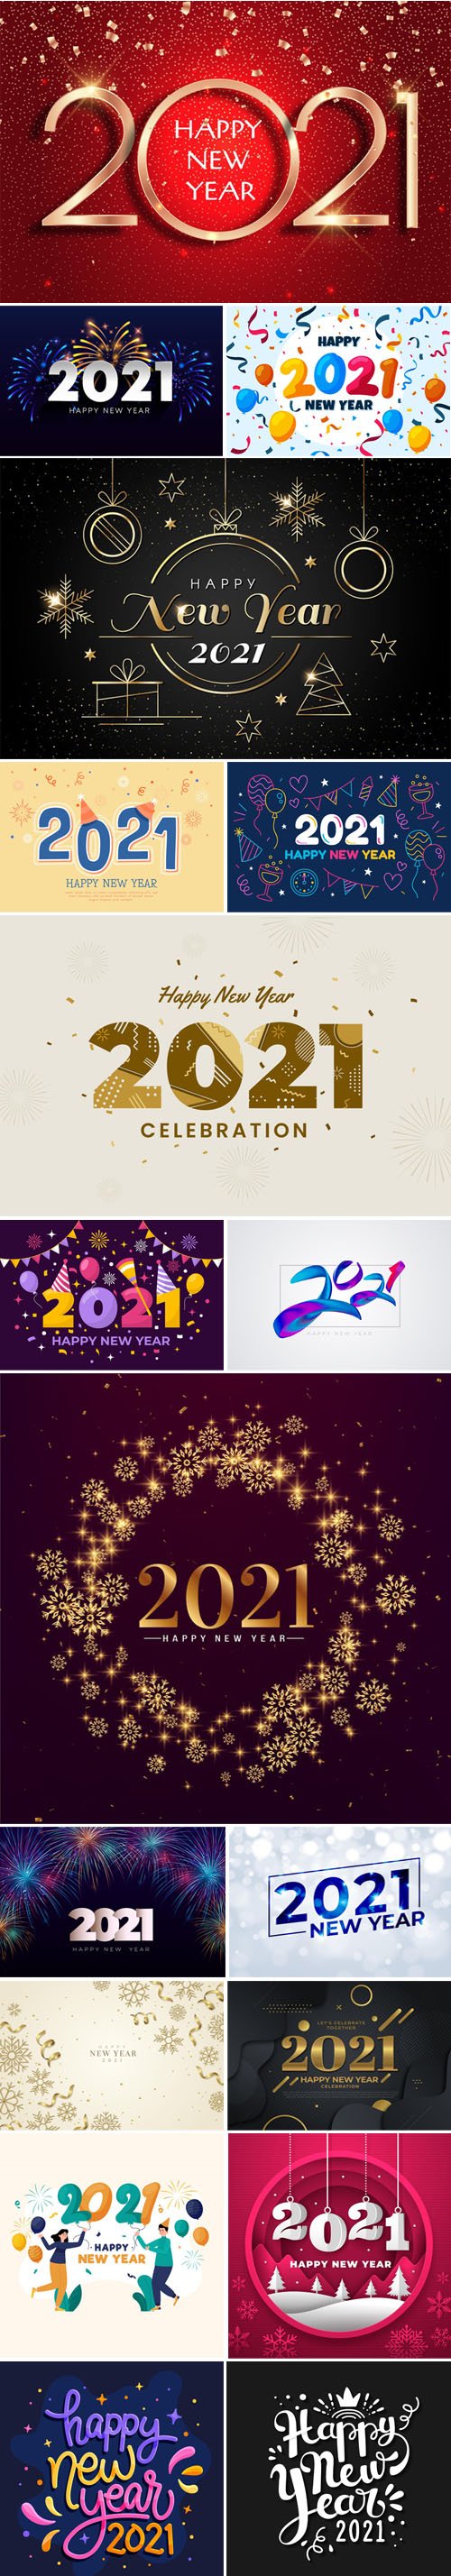 25xt-127454 18-Happy-New-Year-2021-Backgrounds-Lettering 2.jpg